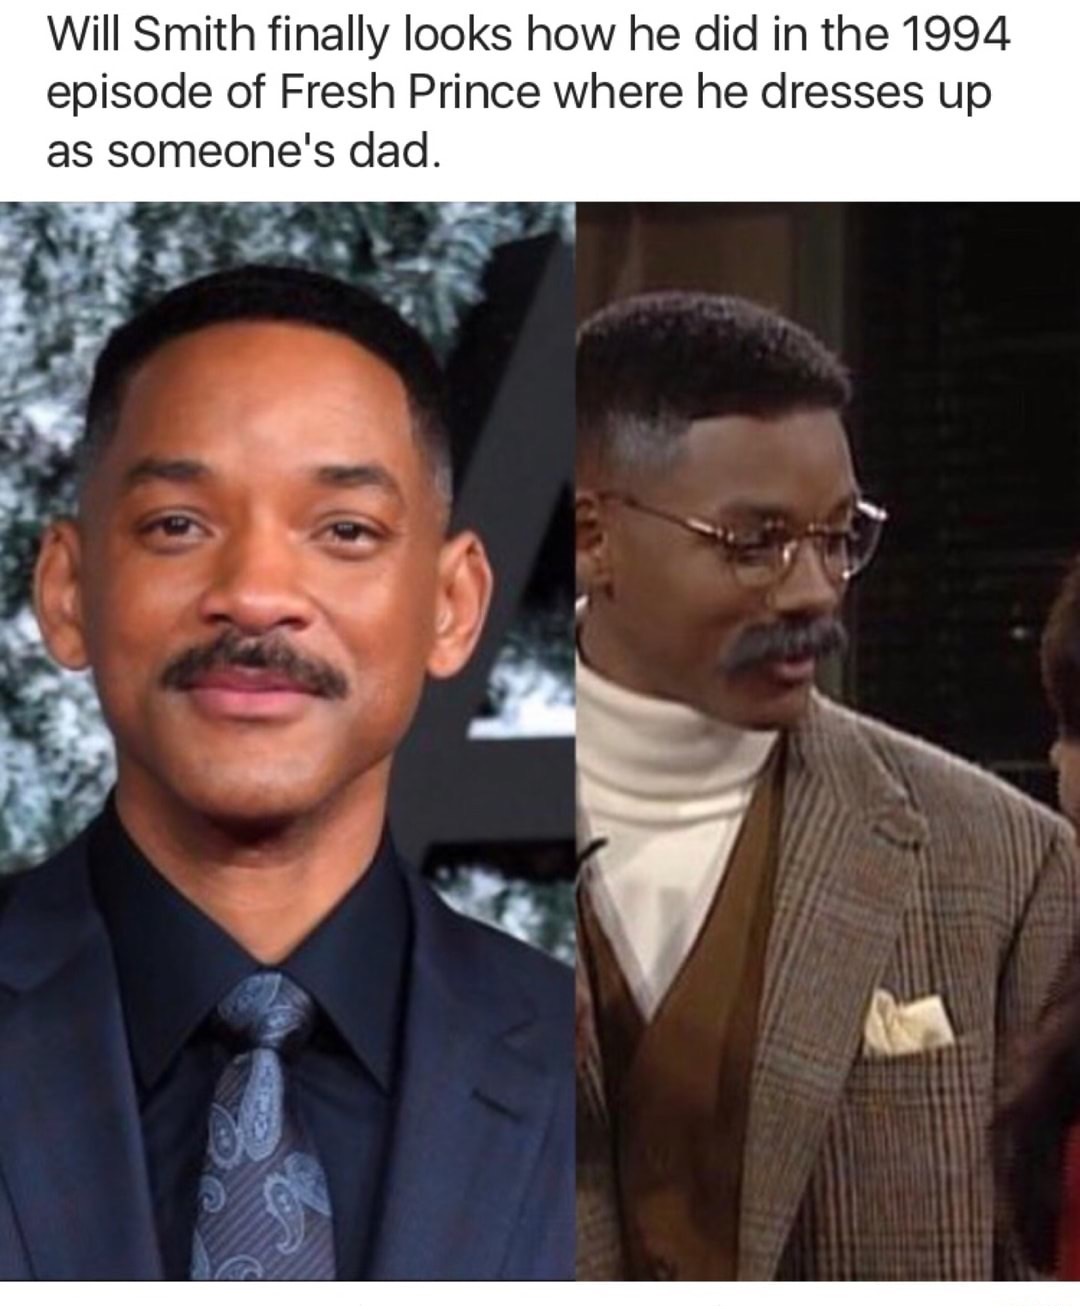 Meme of Will Smith looking like he did in Fresh Prince when he dressed up as someone's dad.